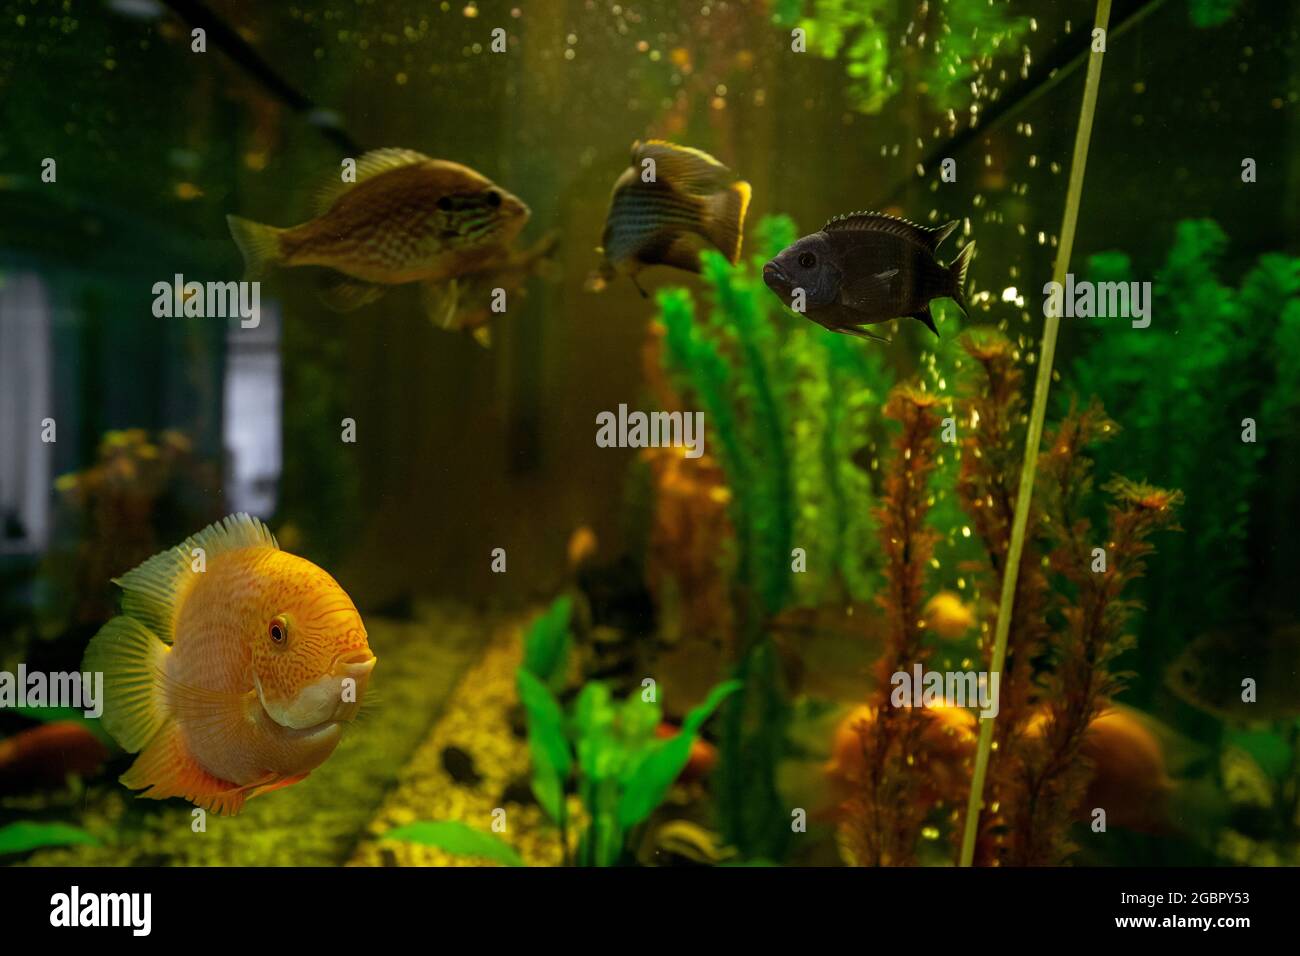 Exotic fish swimming in water among plants behind glass of aquarium Stock Photo